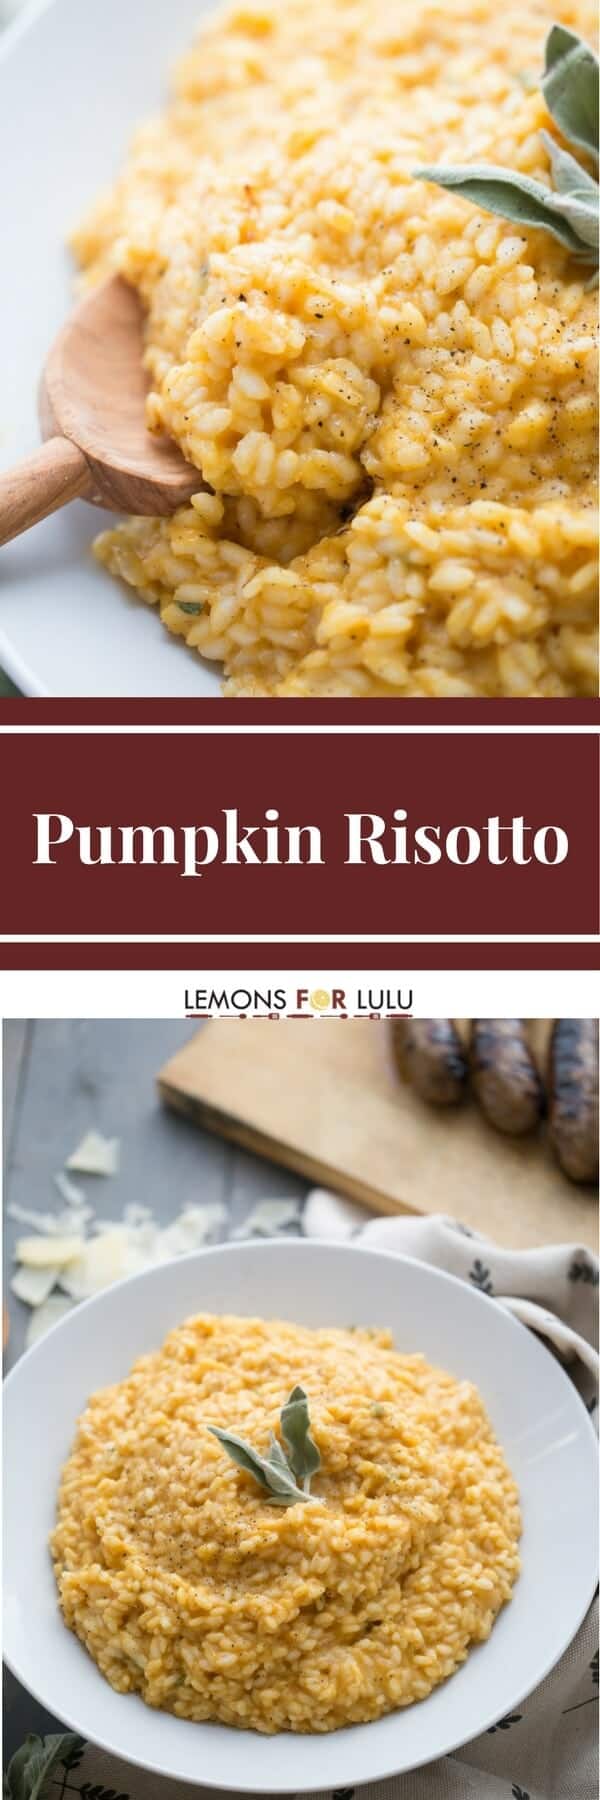 Risotto is a creamy and satisfying side dish that is quite easy to prepare at home. This pumpkin risotto is a fall-inspired twist on this classic dish!